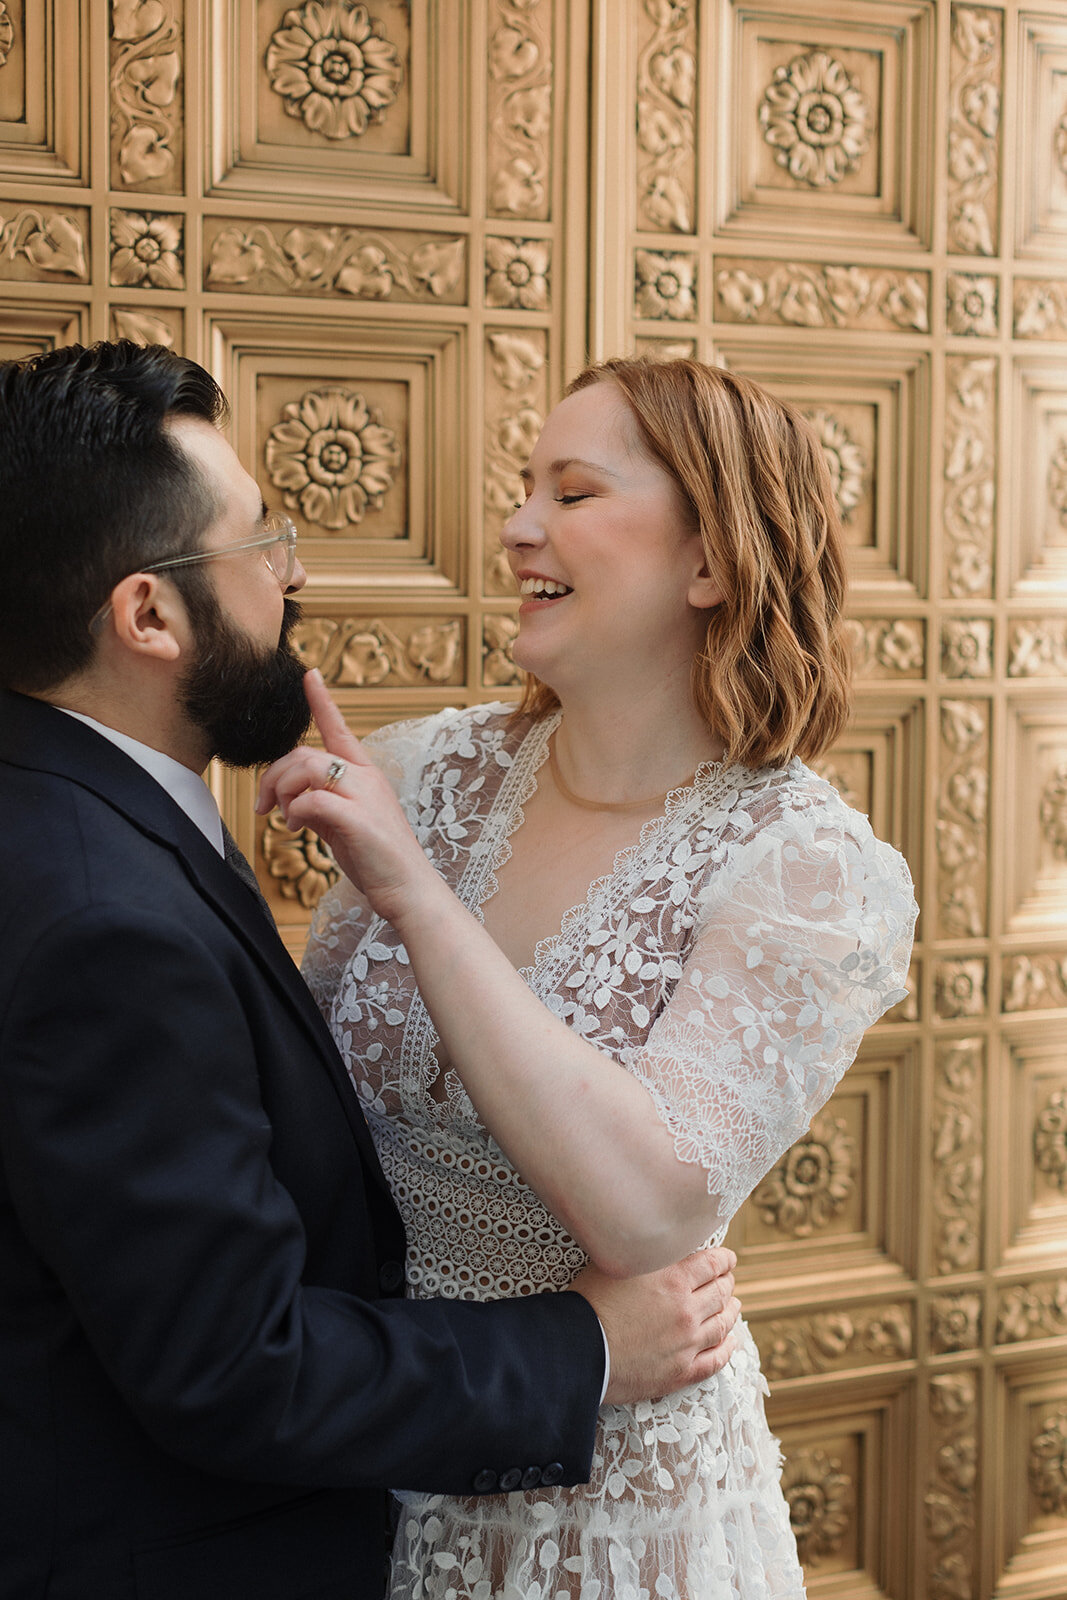 Elopement couple embraces and laughs, bride is touching the grooms face. Large gold brass doors are behind them.